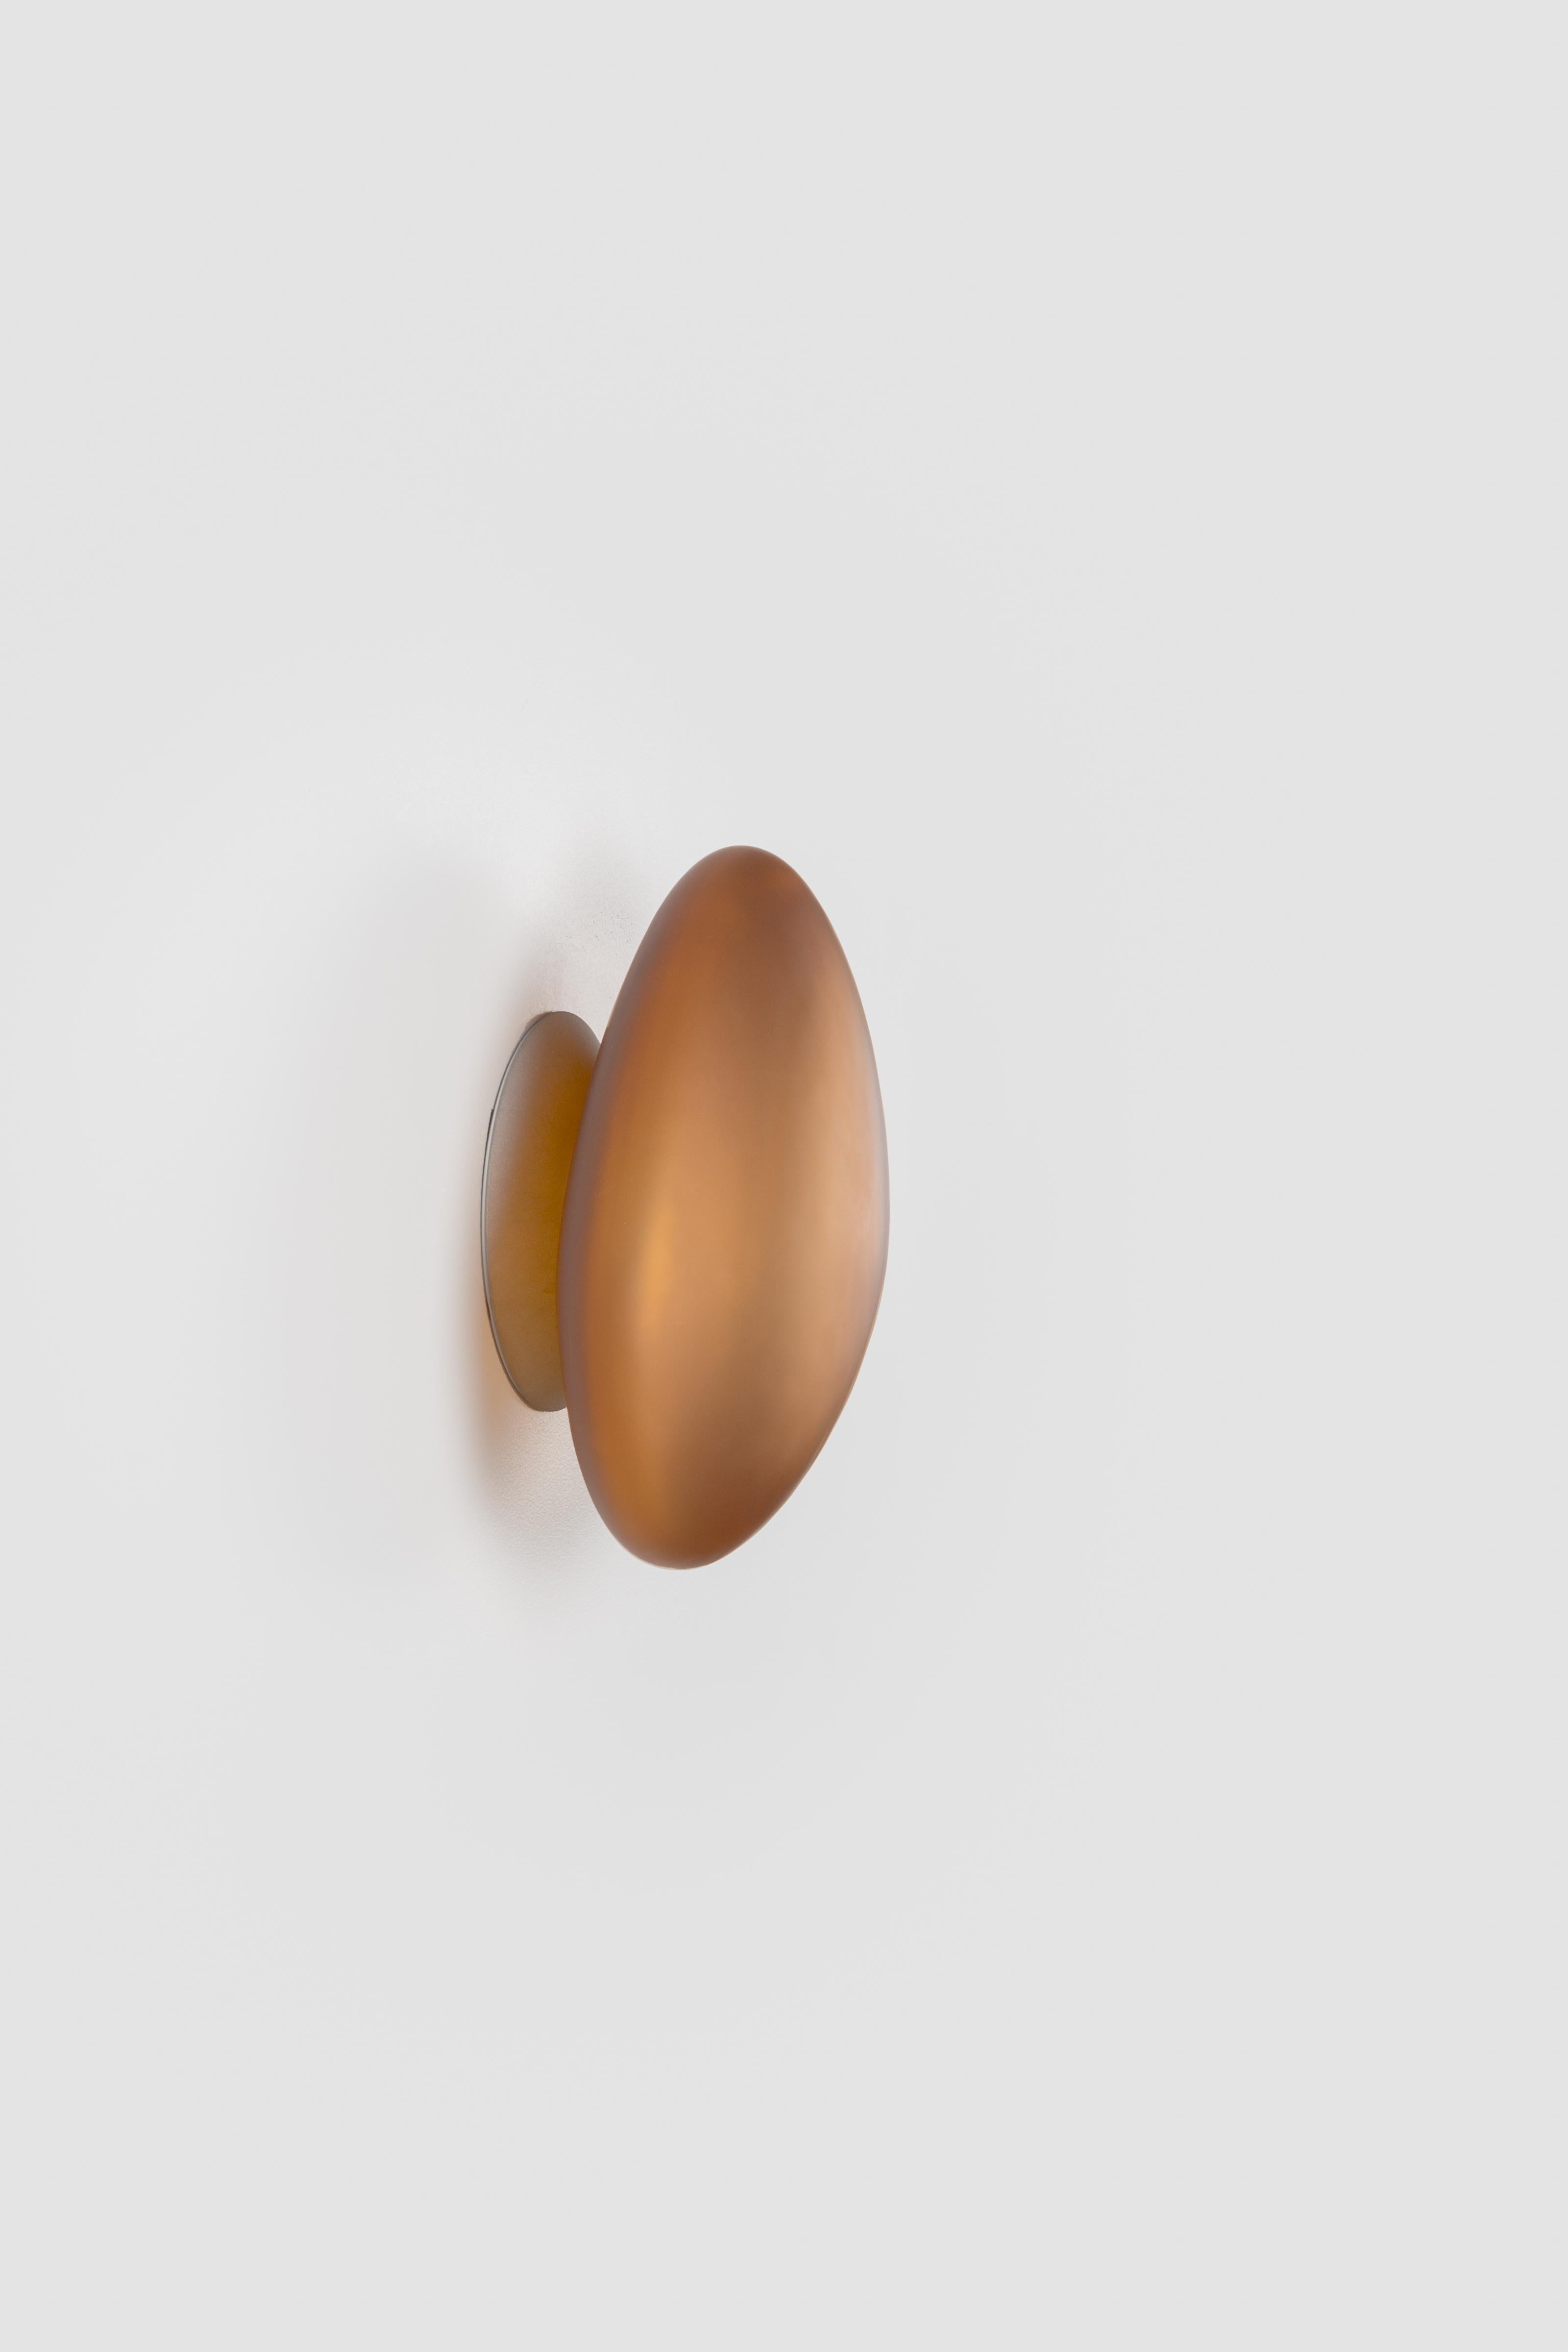 Contemporary Wall Lamp 'Pebble' by Andlight, Shape C, Citrine In New Condition For Sale In Paris, FR